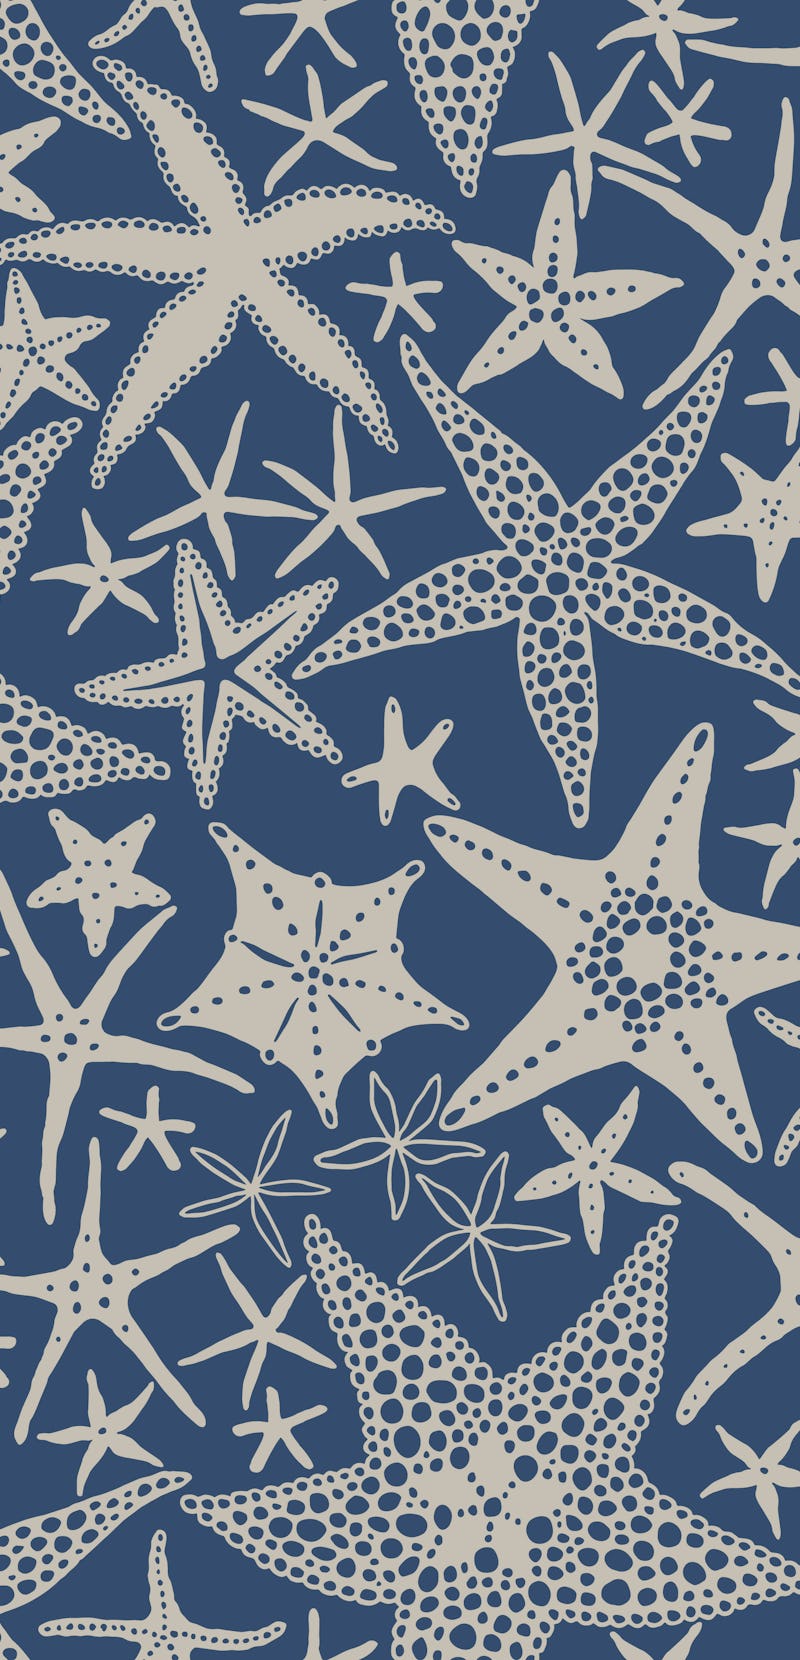 Starfishes on blue background, seamless doodle pattern with scattered abstract sea stars. Vector han...